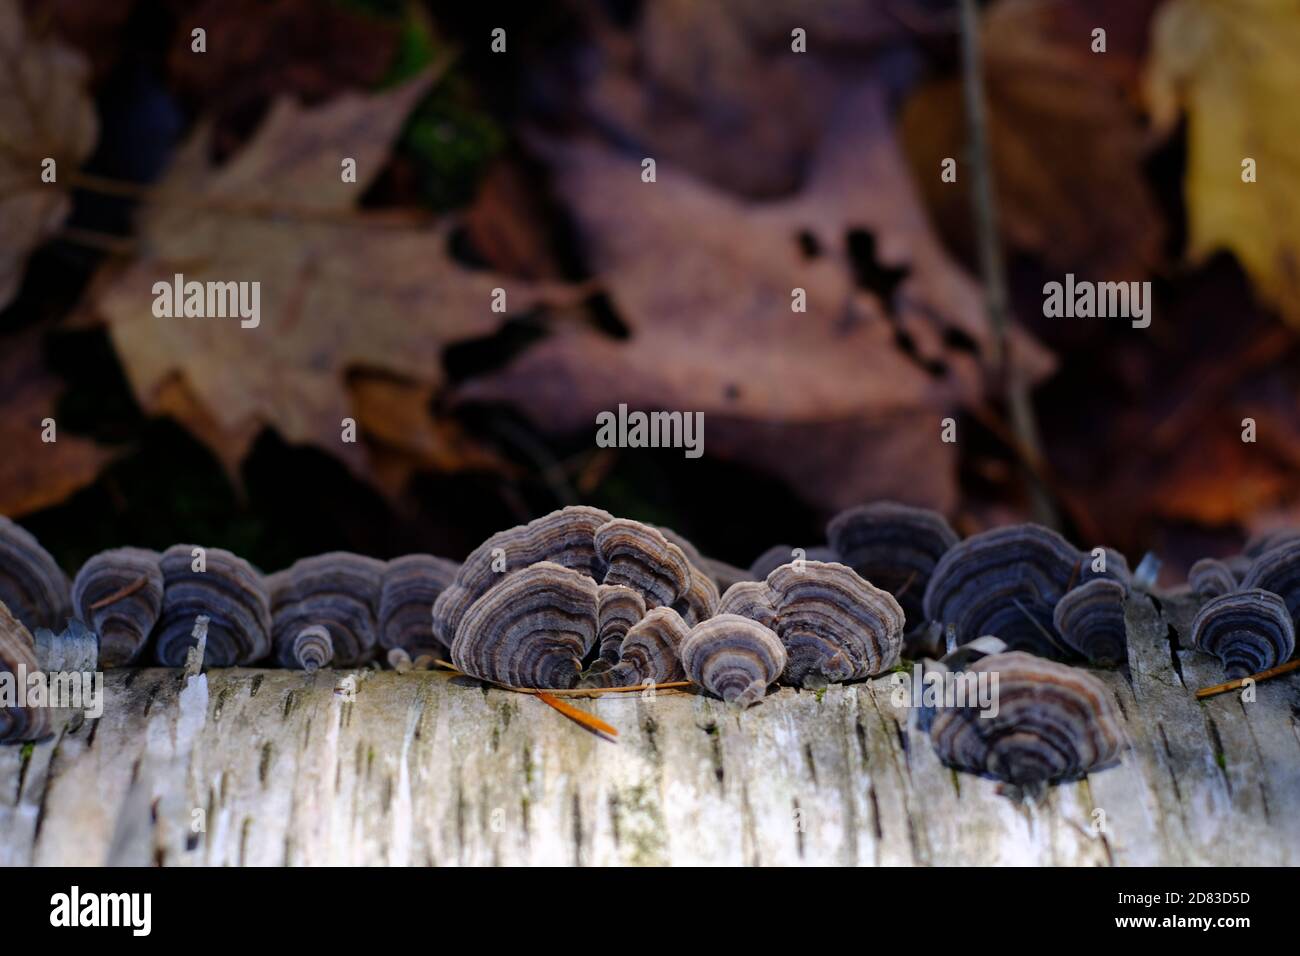 Turkey tail fungus (Trametes versicolor) on a log in an autumnal, leafy forest in Quebec. Wakefield, Canada. Stock Photo